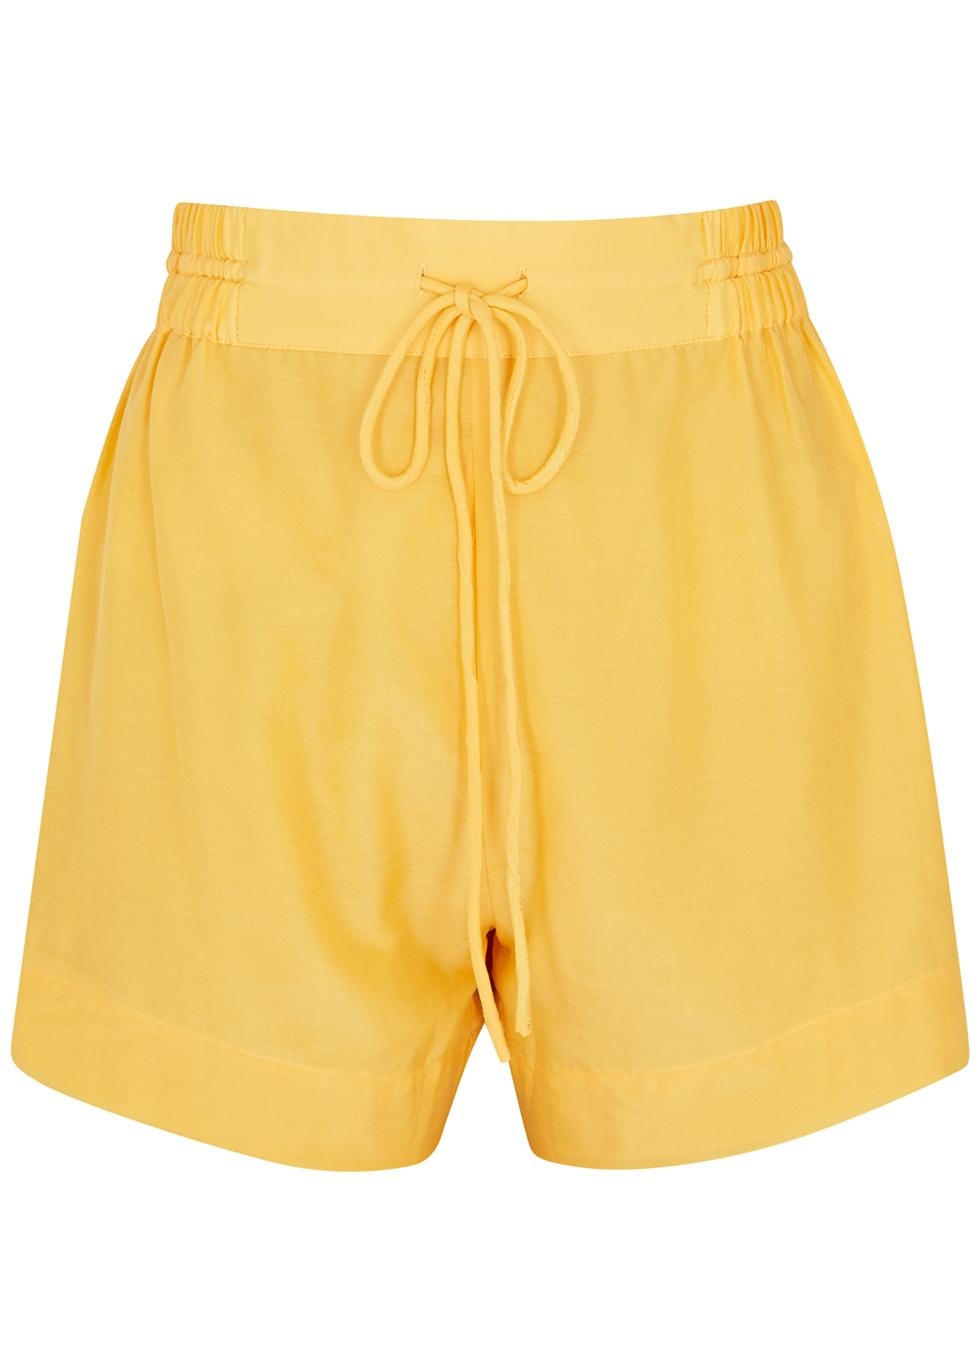 Sadie yellow cotton-blend shorts by BIRD&KNOLL